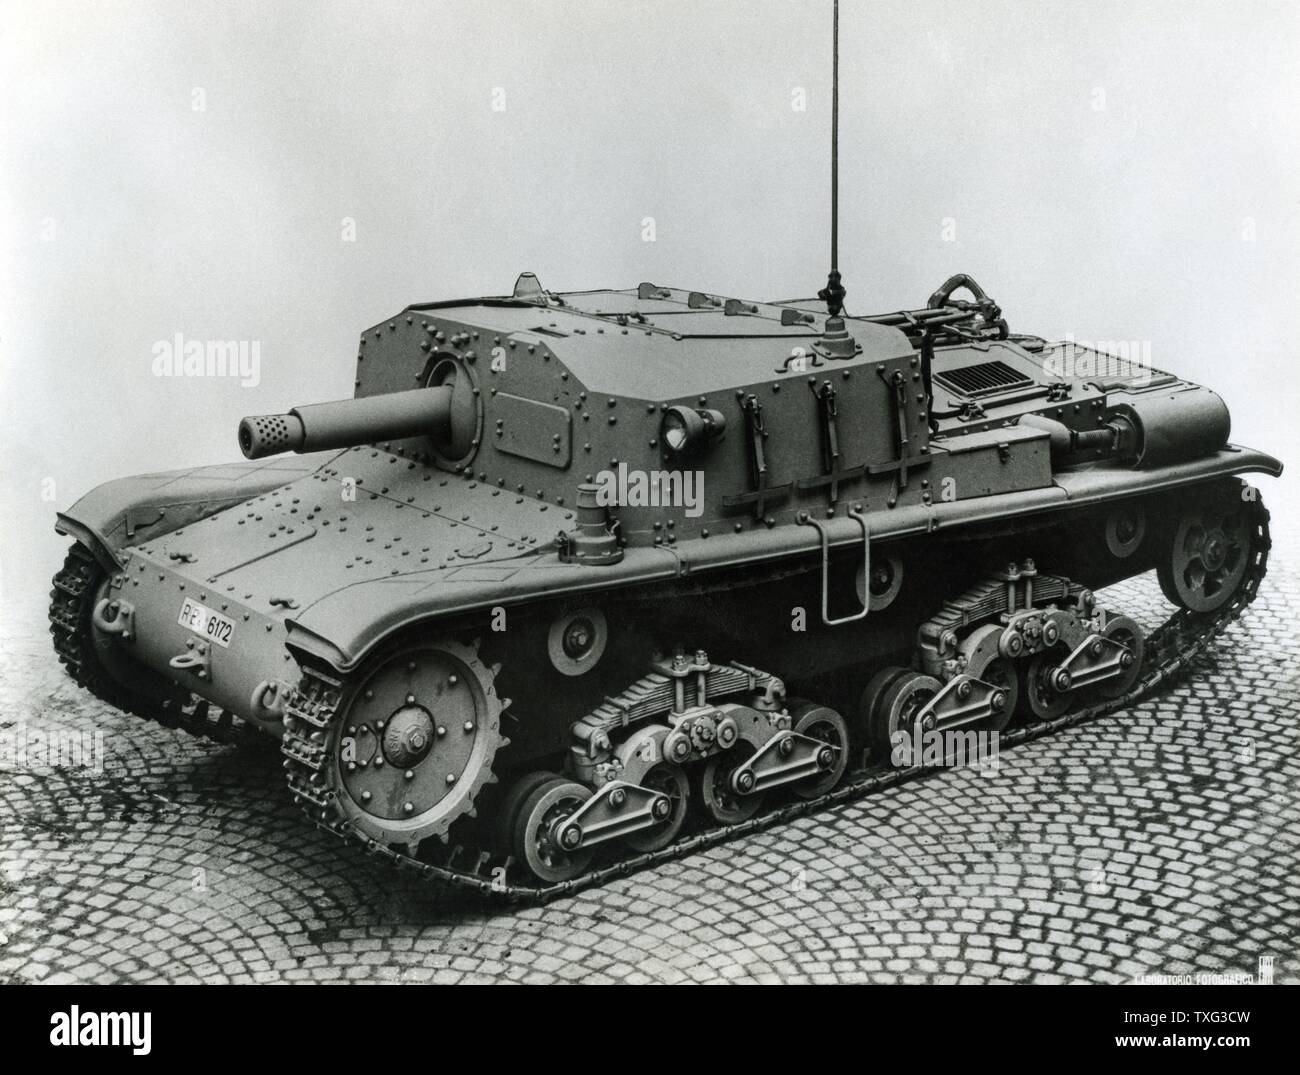 The Italian self-propelled gun 'The Semovente da 75/18', designed by Fiat-Ansaldo and used by the Italian and German army during the Second World War. 1942 Stock Photo